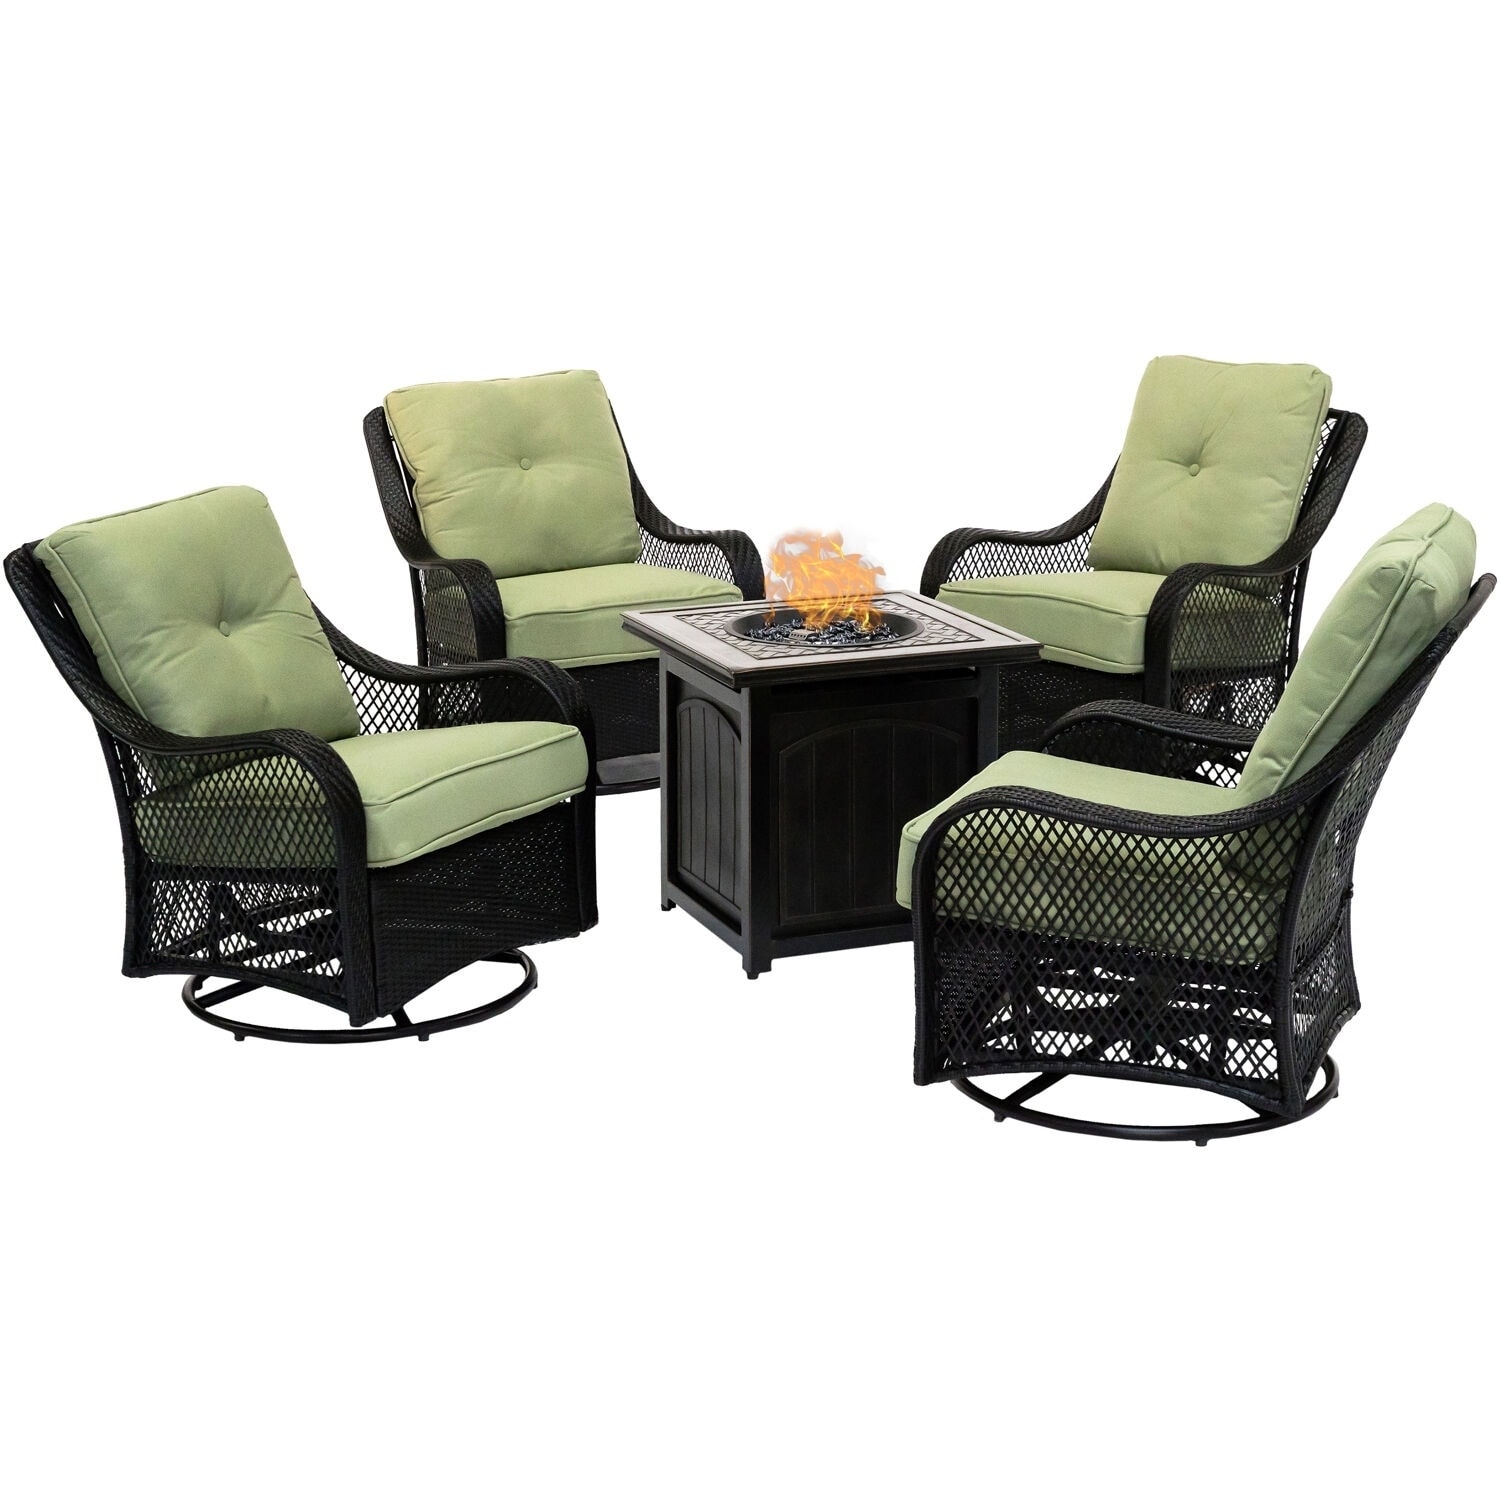 Hanover Orleans 5-Piece Fire Pit Chat Set in Green Jasmine with 4 Woven Swivel Gliders and a 26-In. Square Fire Pit Table